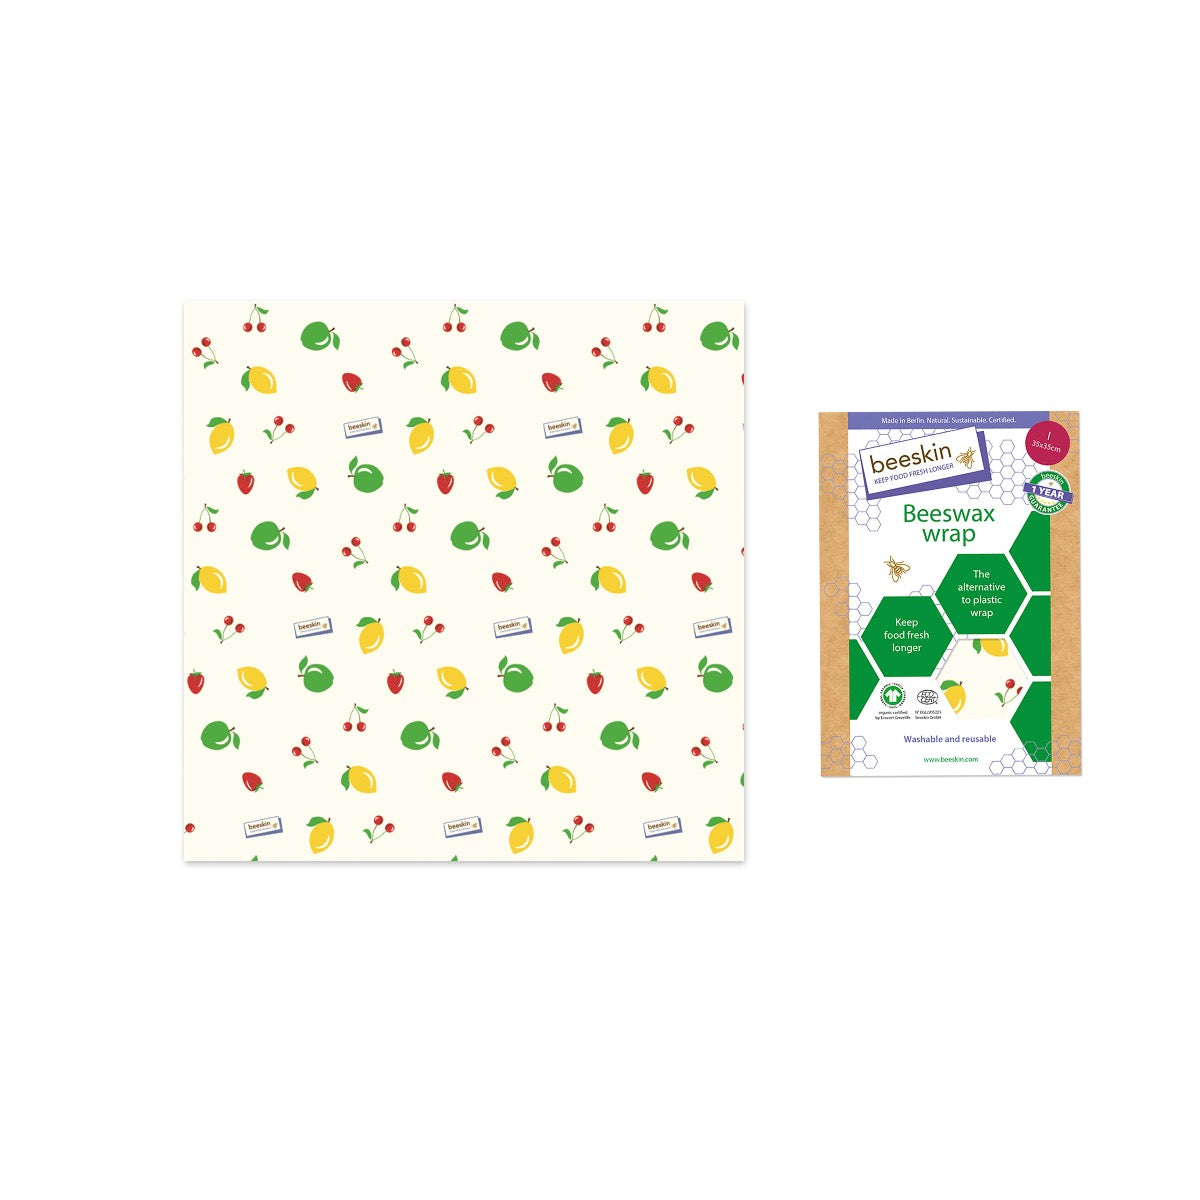 beeskin beeswax wrap fruits next to packaging